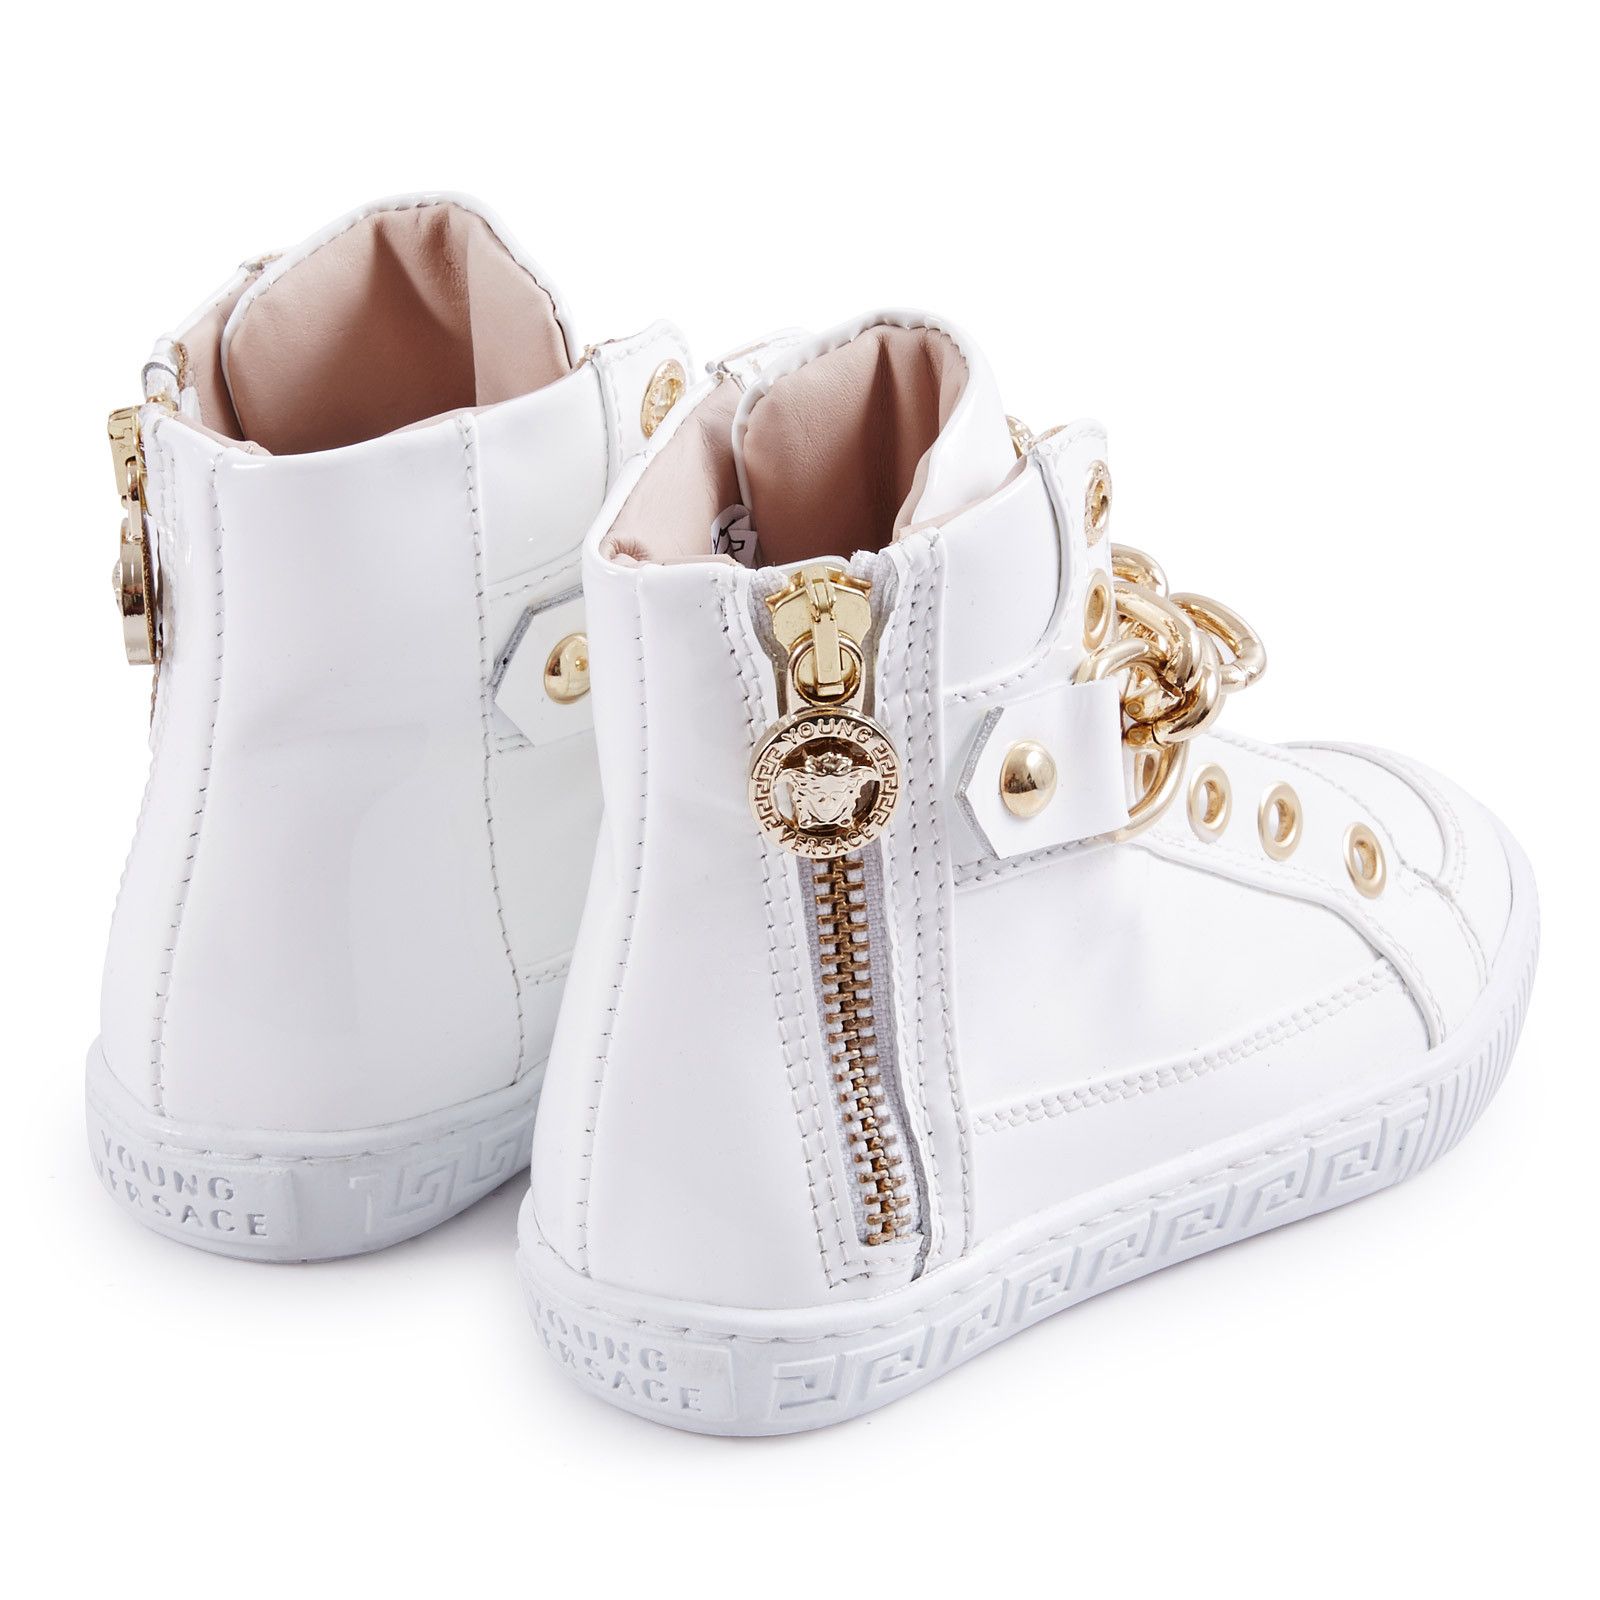 Girls White Patent Leather High-Top Trainers - CÉMAROSE | Children's Fashion Store - 2